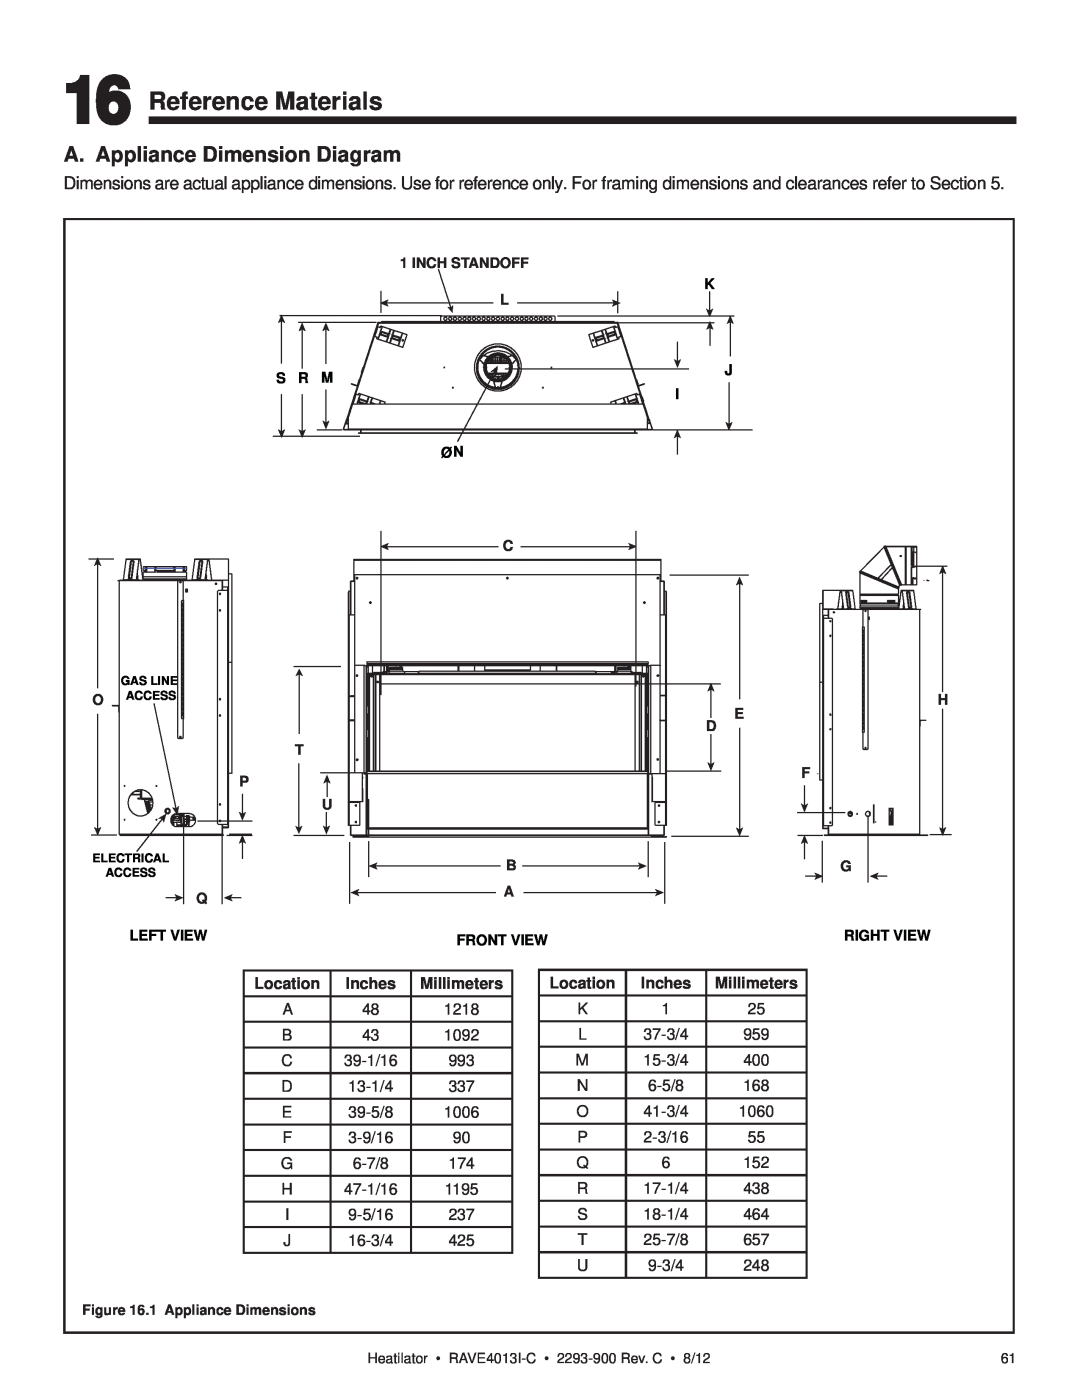 Heatiator Rave4013i-c owner manual Reference Materials, A. Appliance Dimension Diagram, Location, Inches, Millimeters 